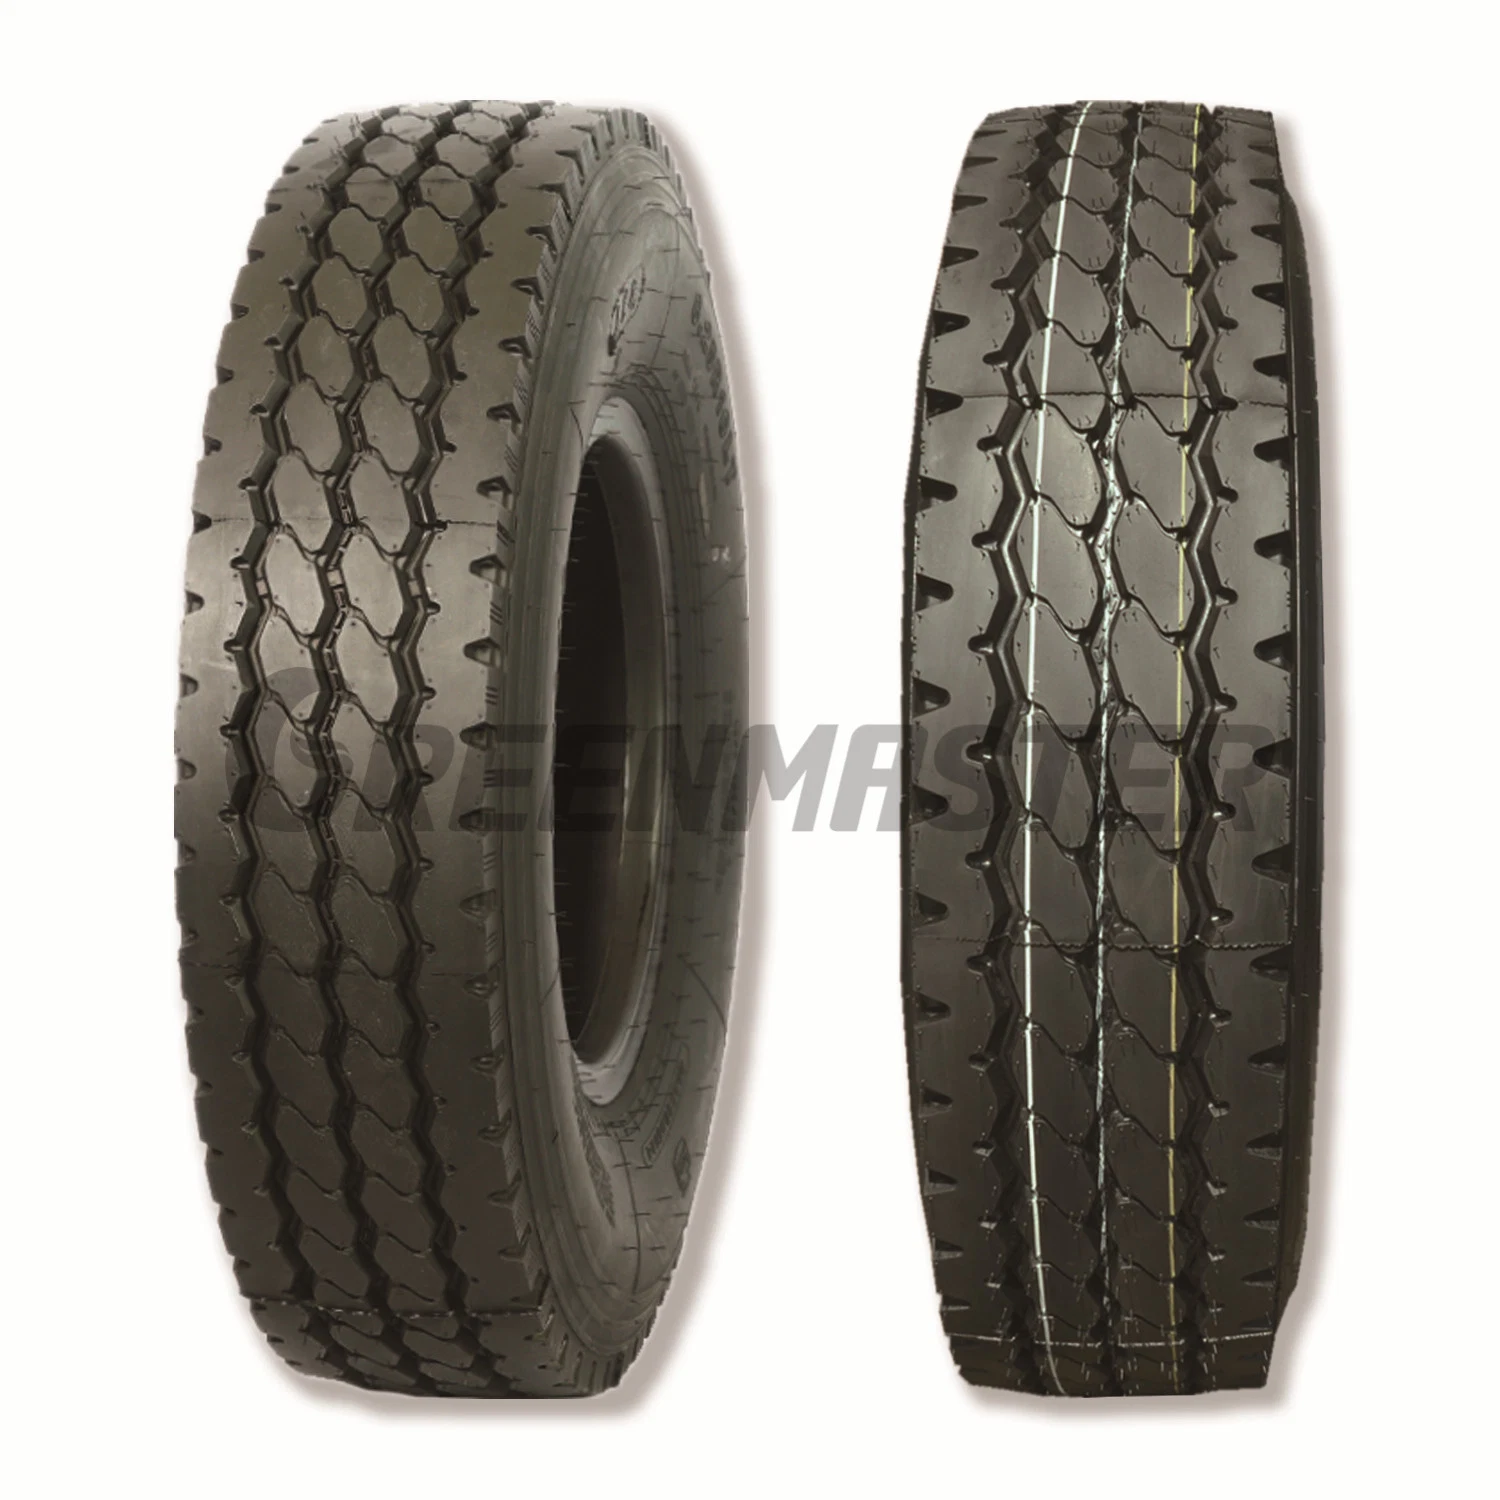 Competitive Price Wholesale/Supplier All Steel Radial Light Truck Bus Tyre, Trailer Tires TBR Pickup Van Tire 650r14lt 6.50r16 with Long Milage and High Endurance